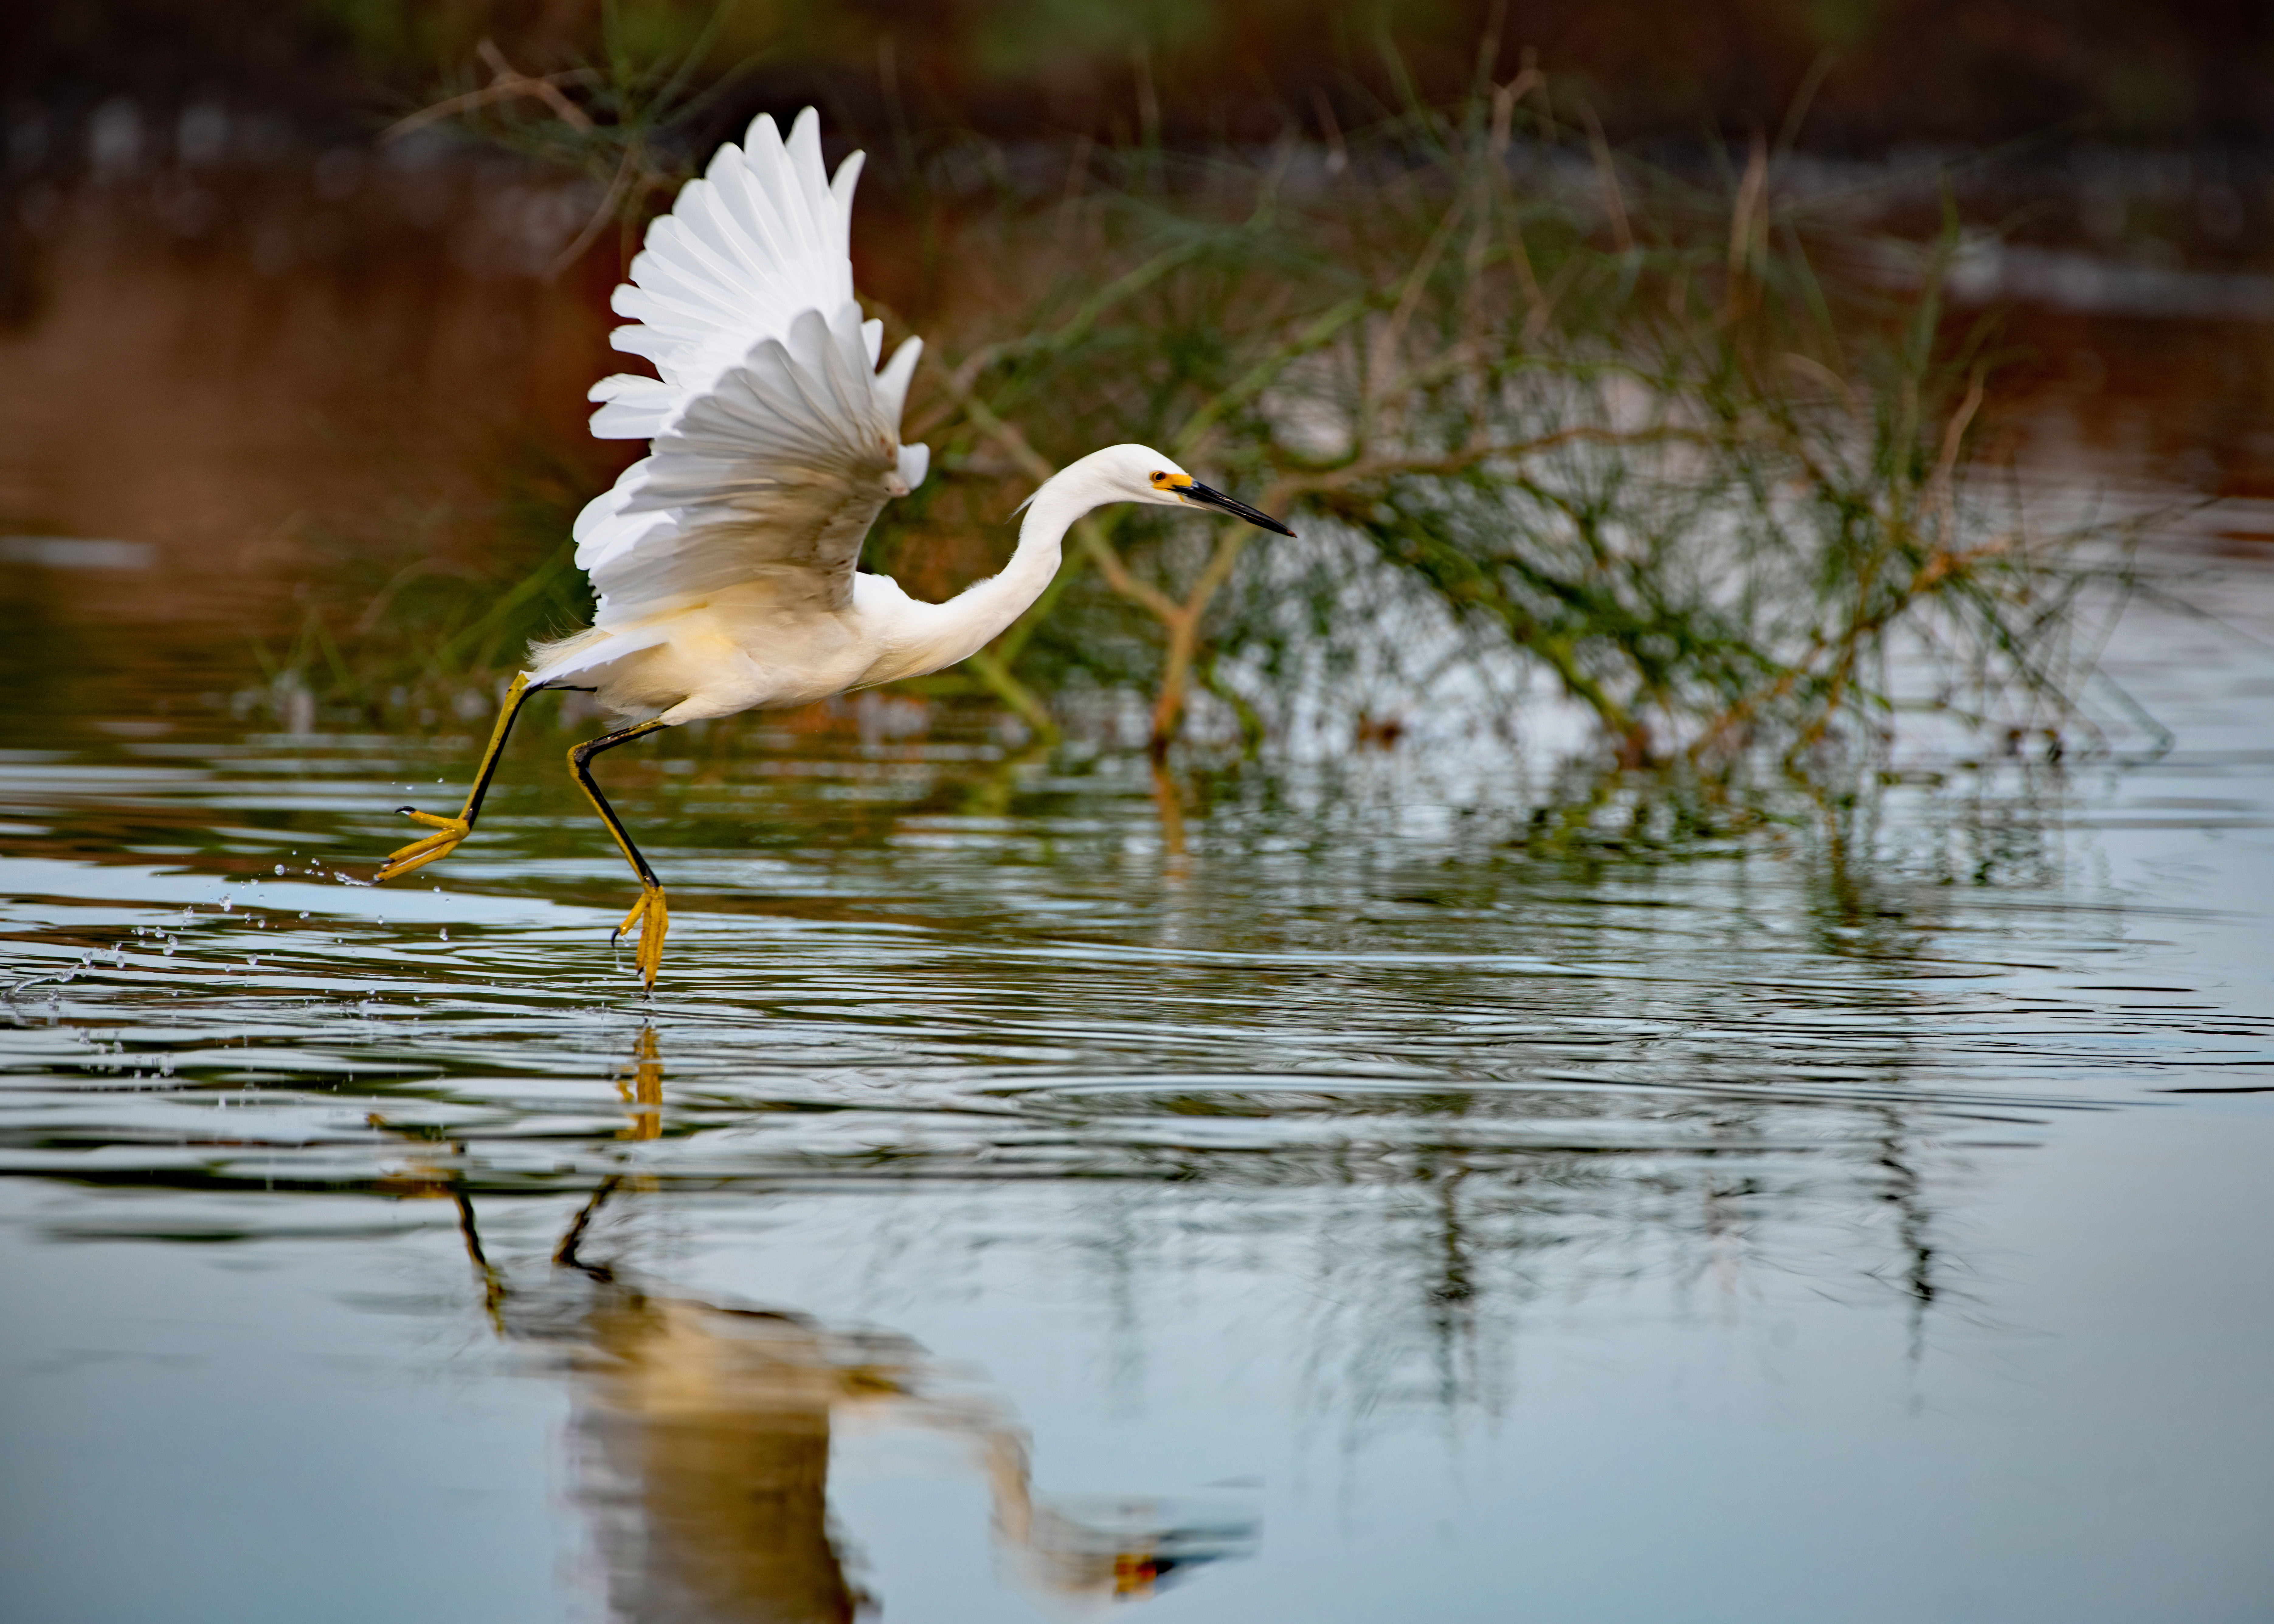 Photo by Patricia Ranweiler  |  Appearance-wise, Great Egrets are the most stunning heron found in Arizona. These birds especially put on a show during breeding season when they grow long feathery plumes, called aigrettes, which are held up during courtship displays.